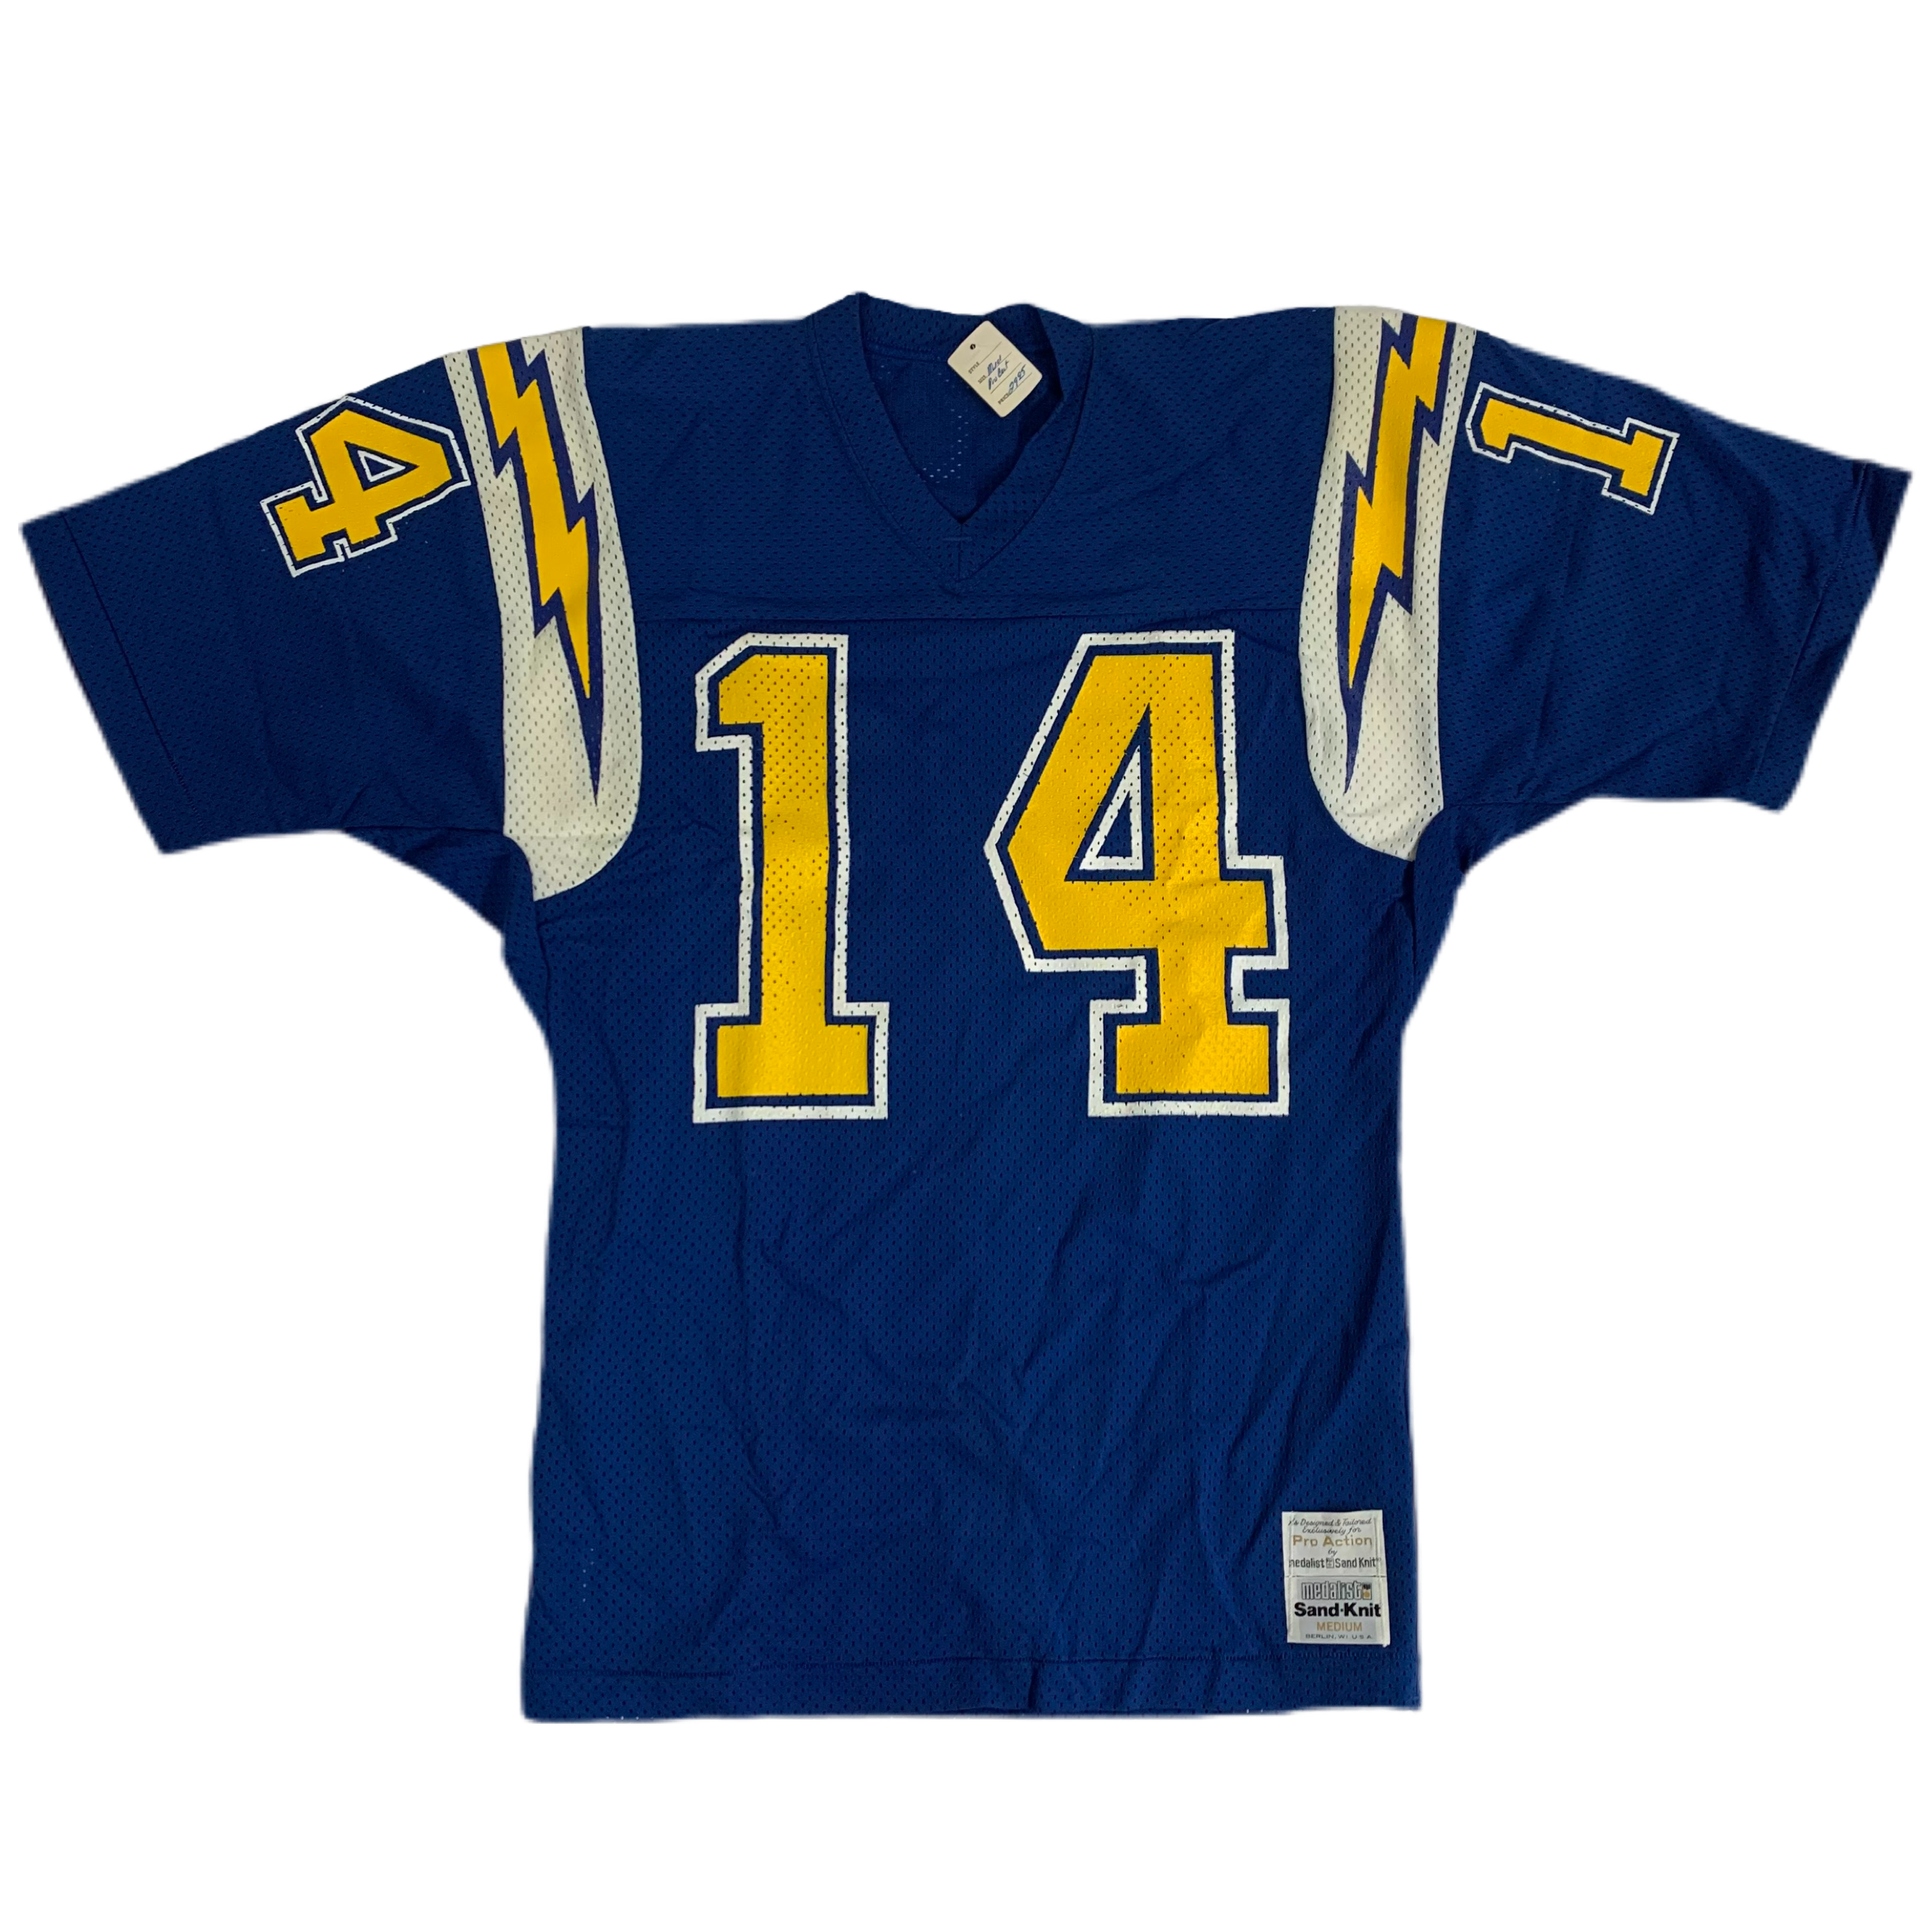 Vintage San Diego Chargers 'Sand-Knit' #14 Pro Cut Football Jersey